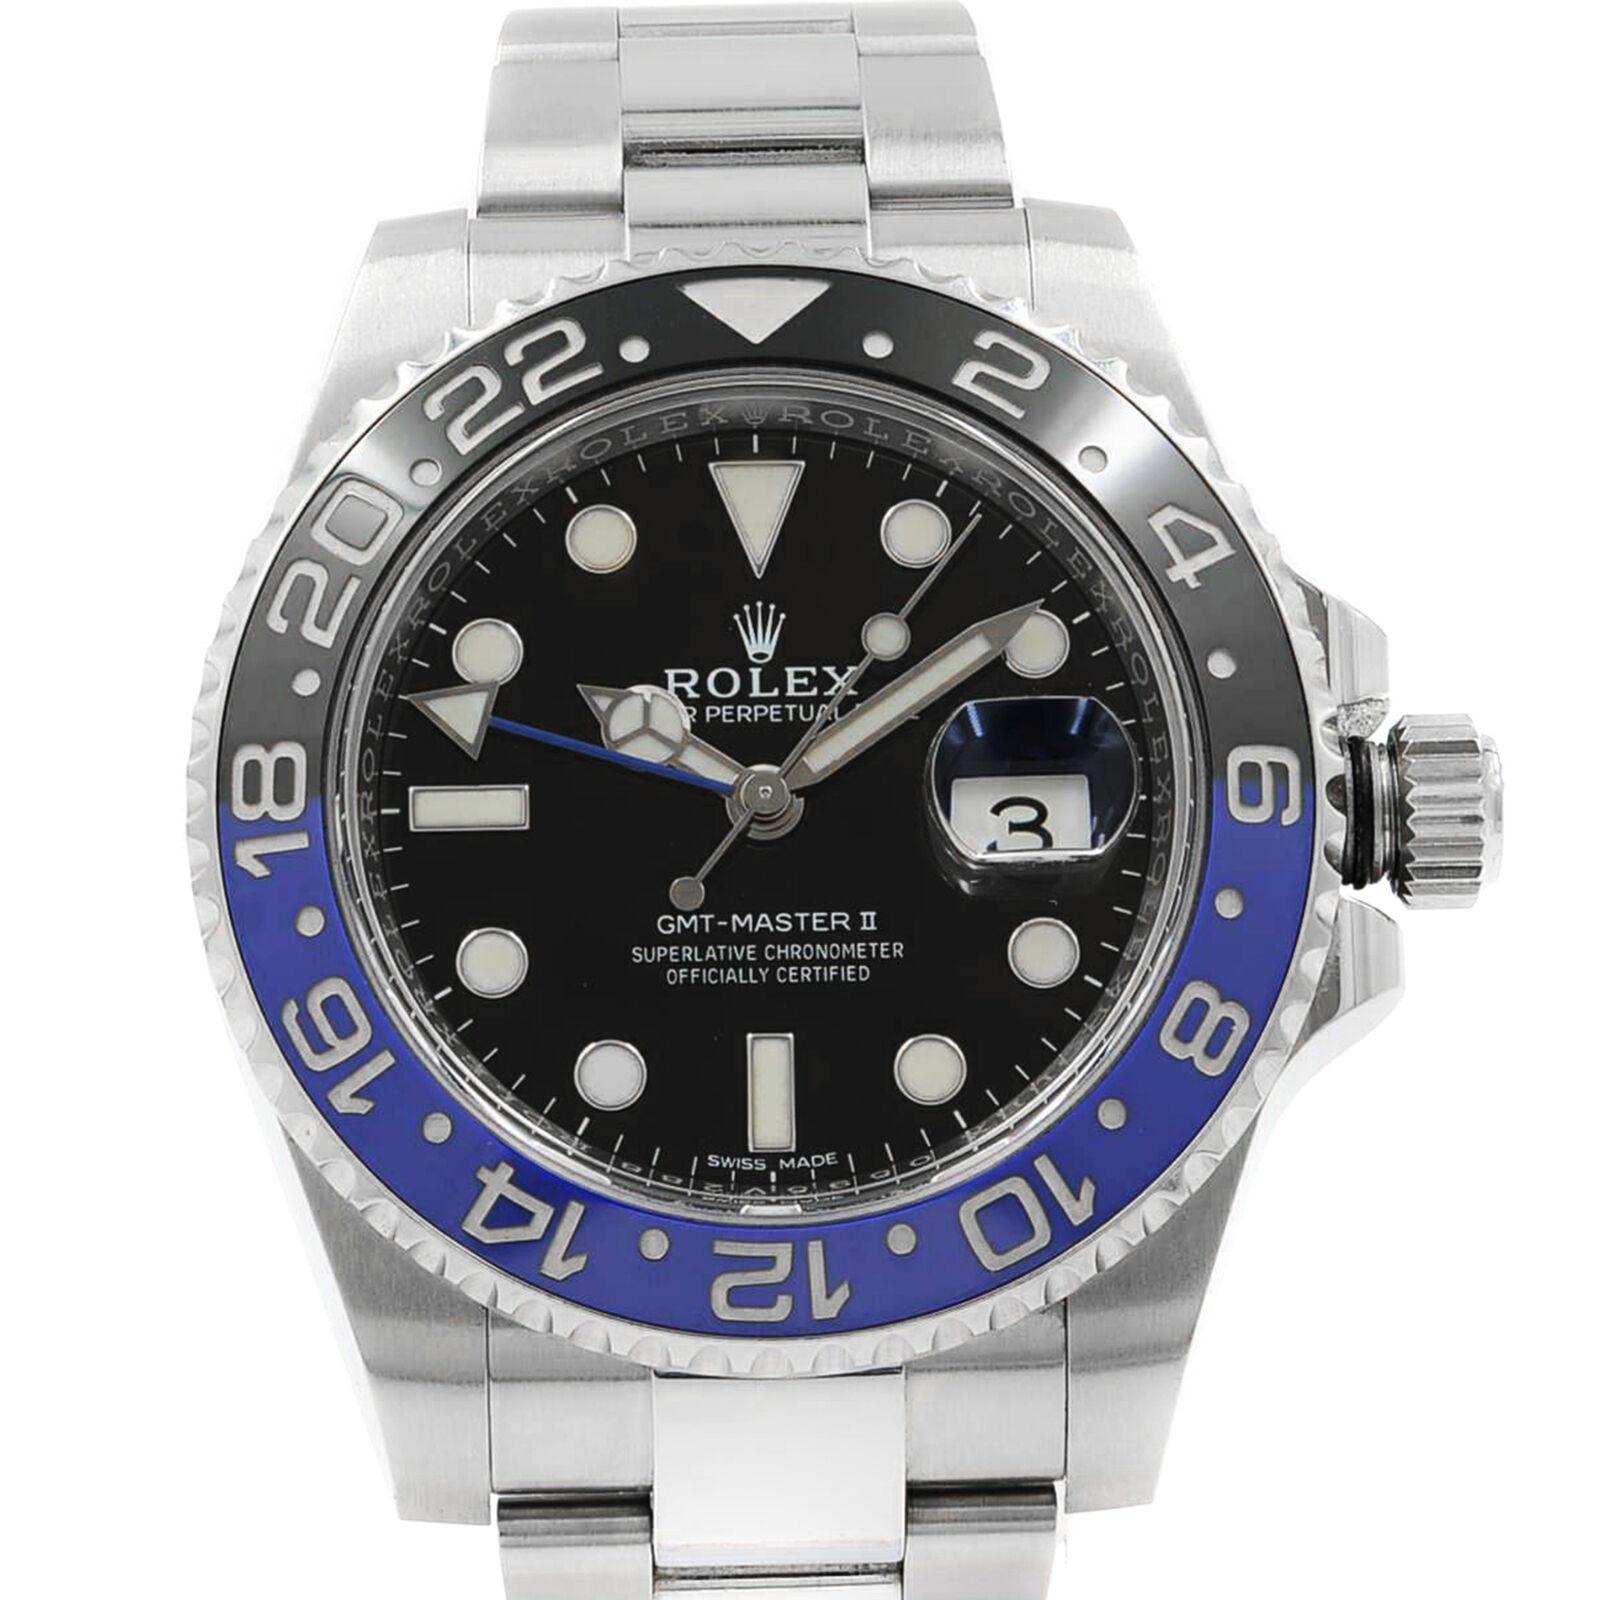 This pre-owned Rolex GMT-Master II 116710BLNR is a beautiful men's timepiece that is powered by an automatic movement which is cased in a stainless steel case. It has a round shape face, date dial and has hand sticks & dots style markers. It is